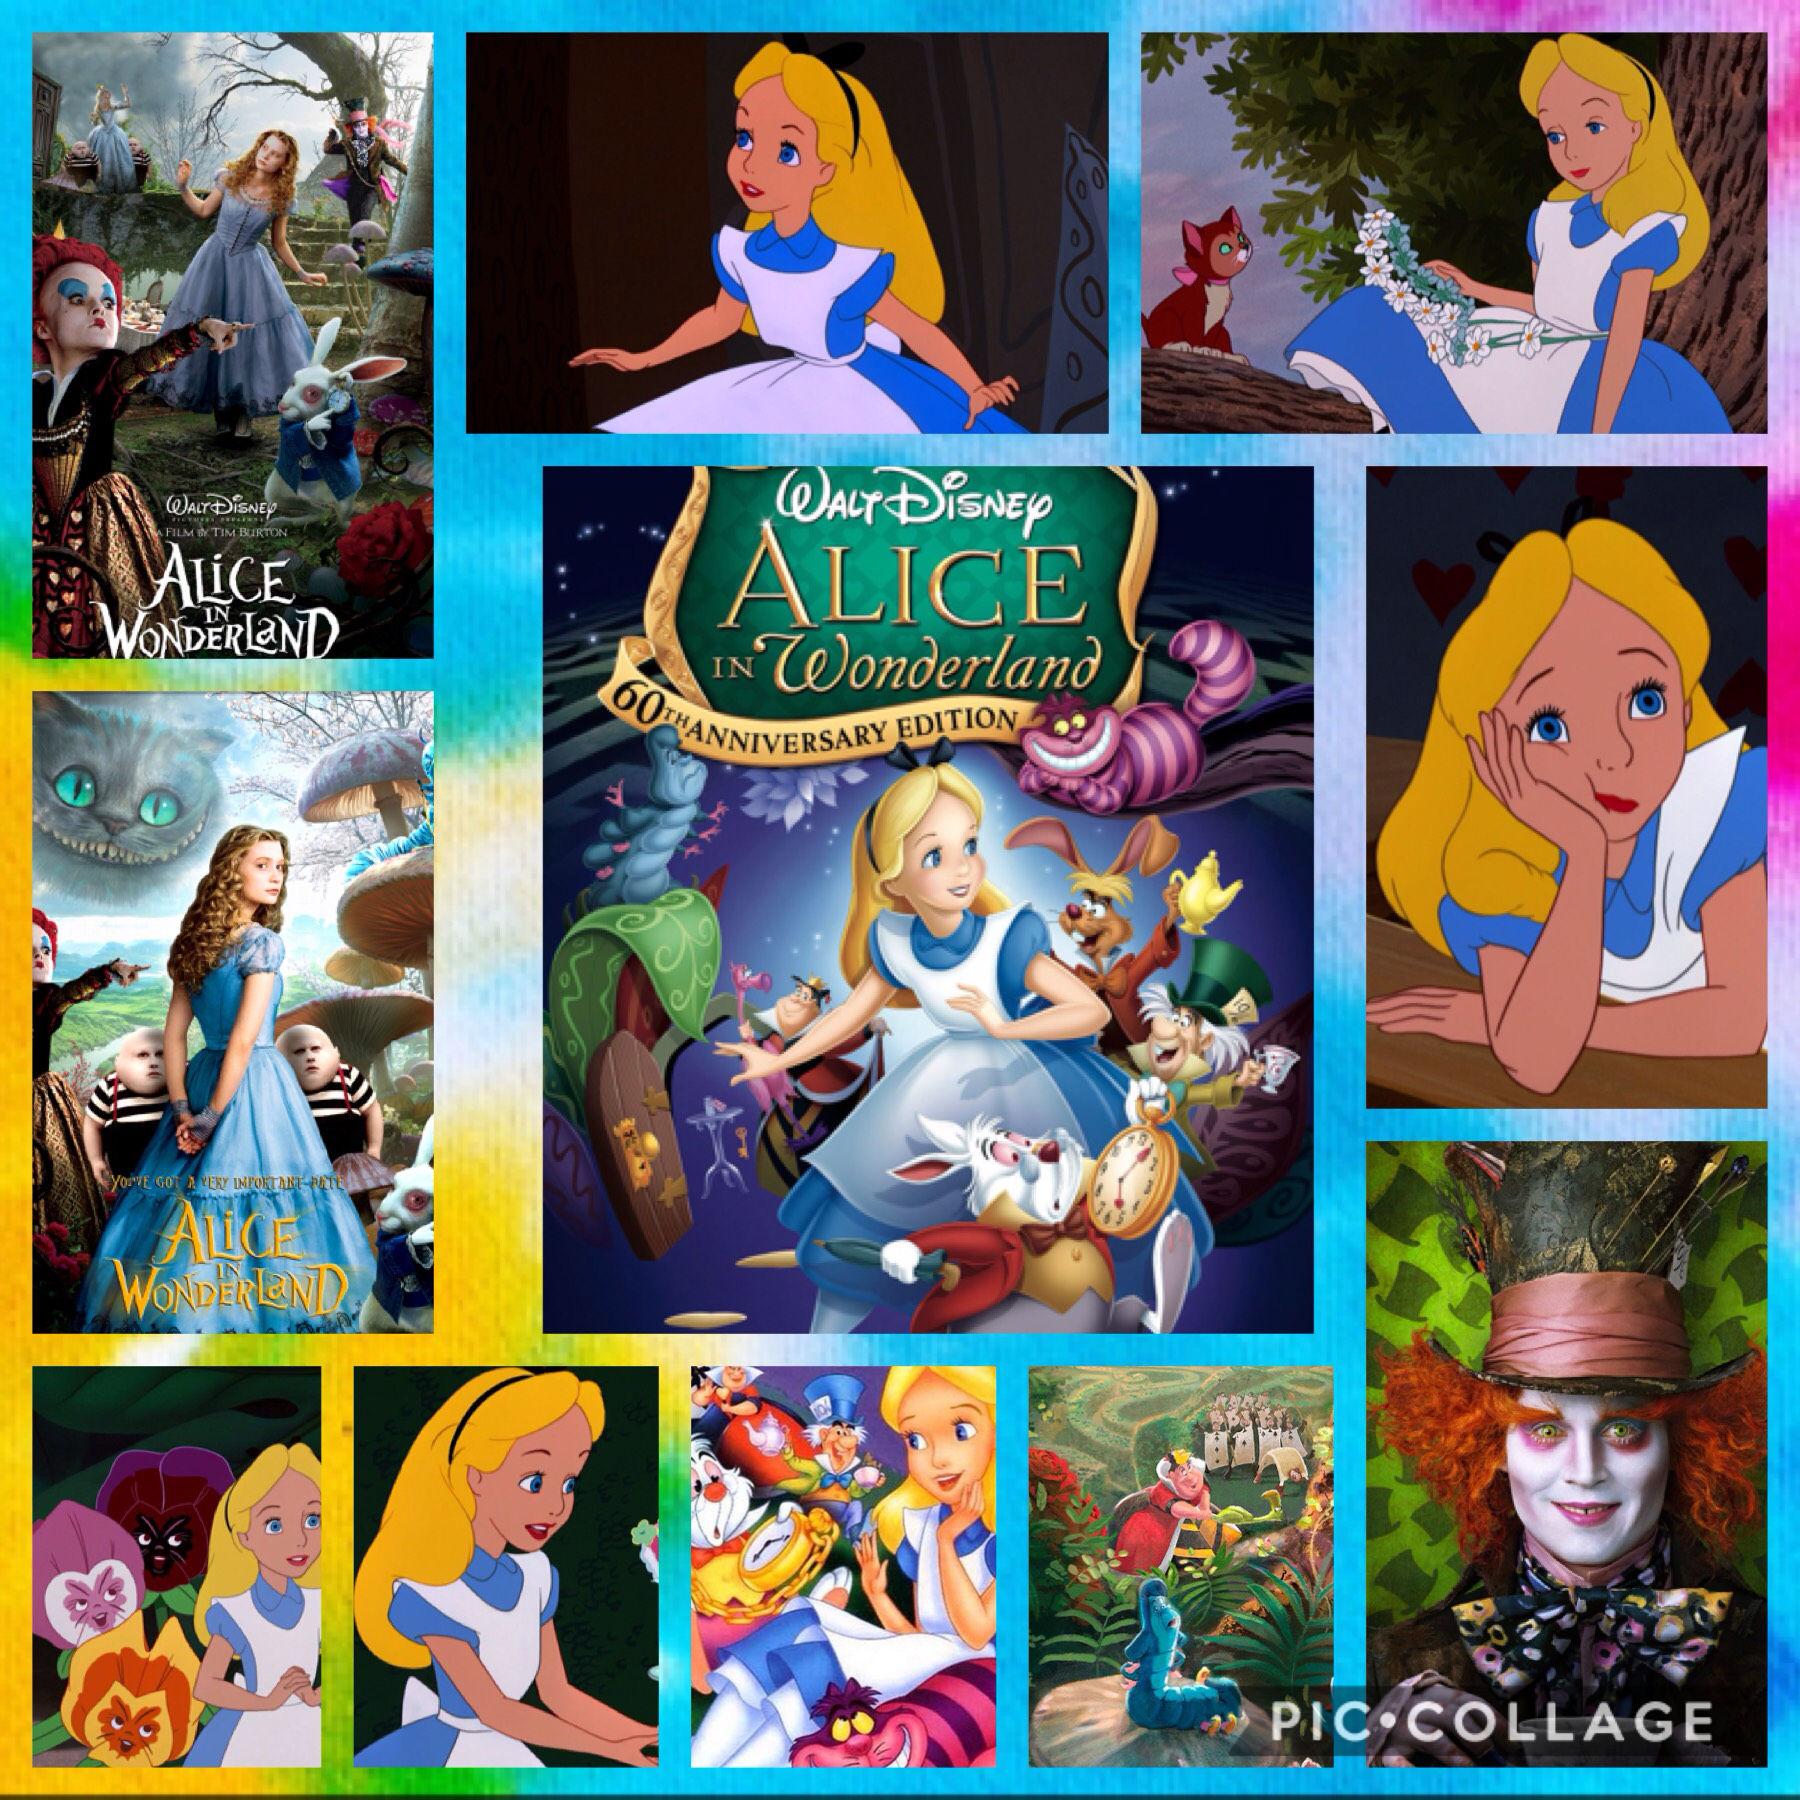 Here's a collage of my favorite Disney movie